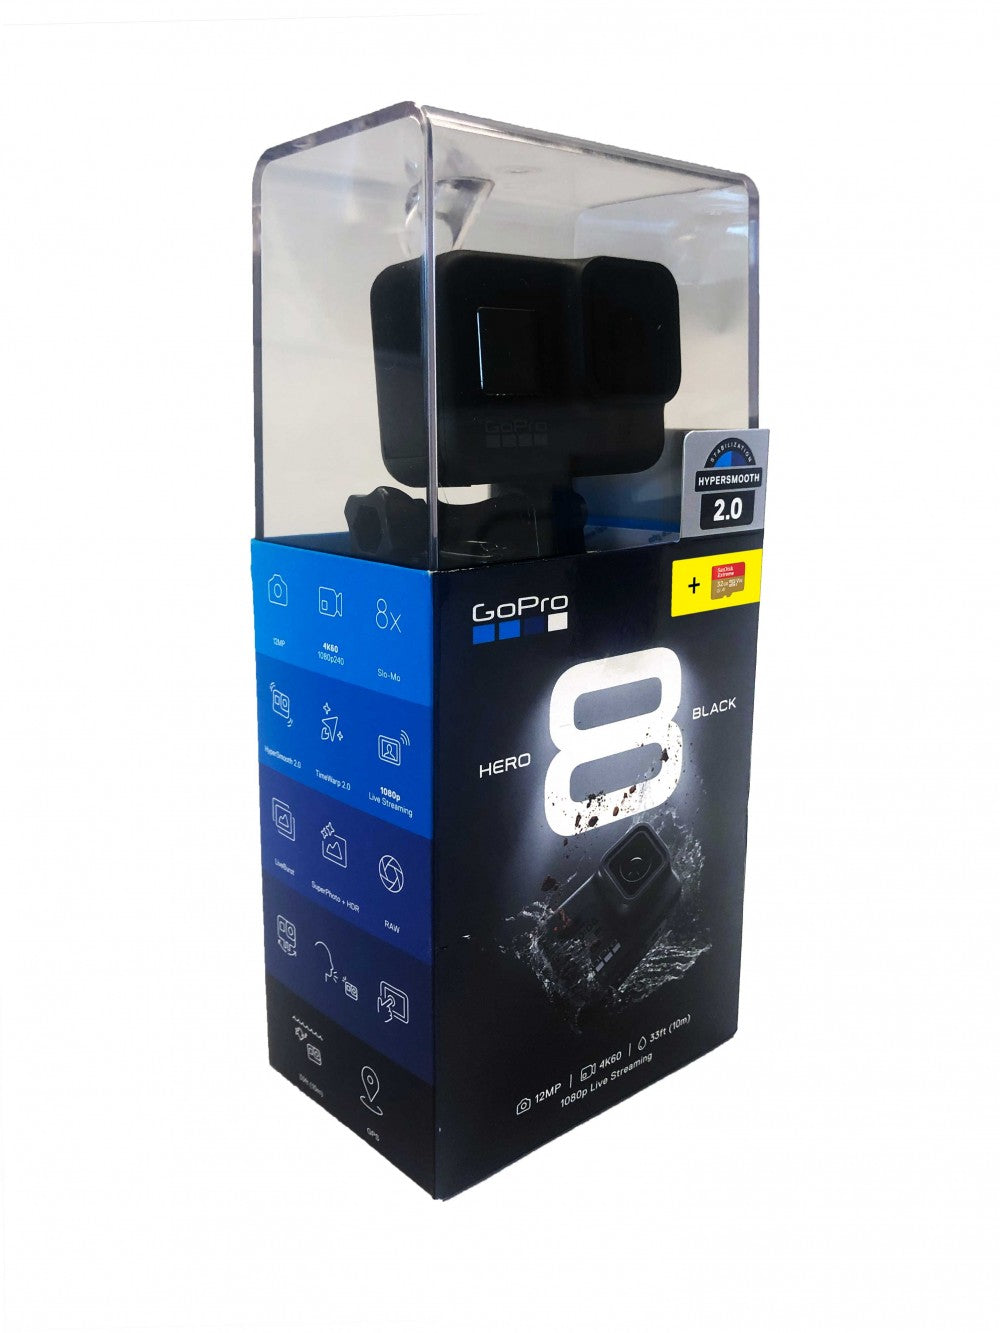 Gopro Camera Hero8 Black Speciality Bundle With Sd Card - TecAfrica Solutions